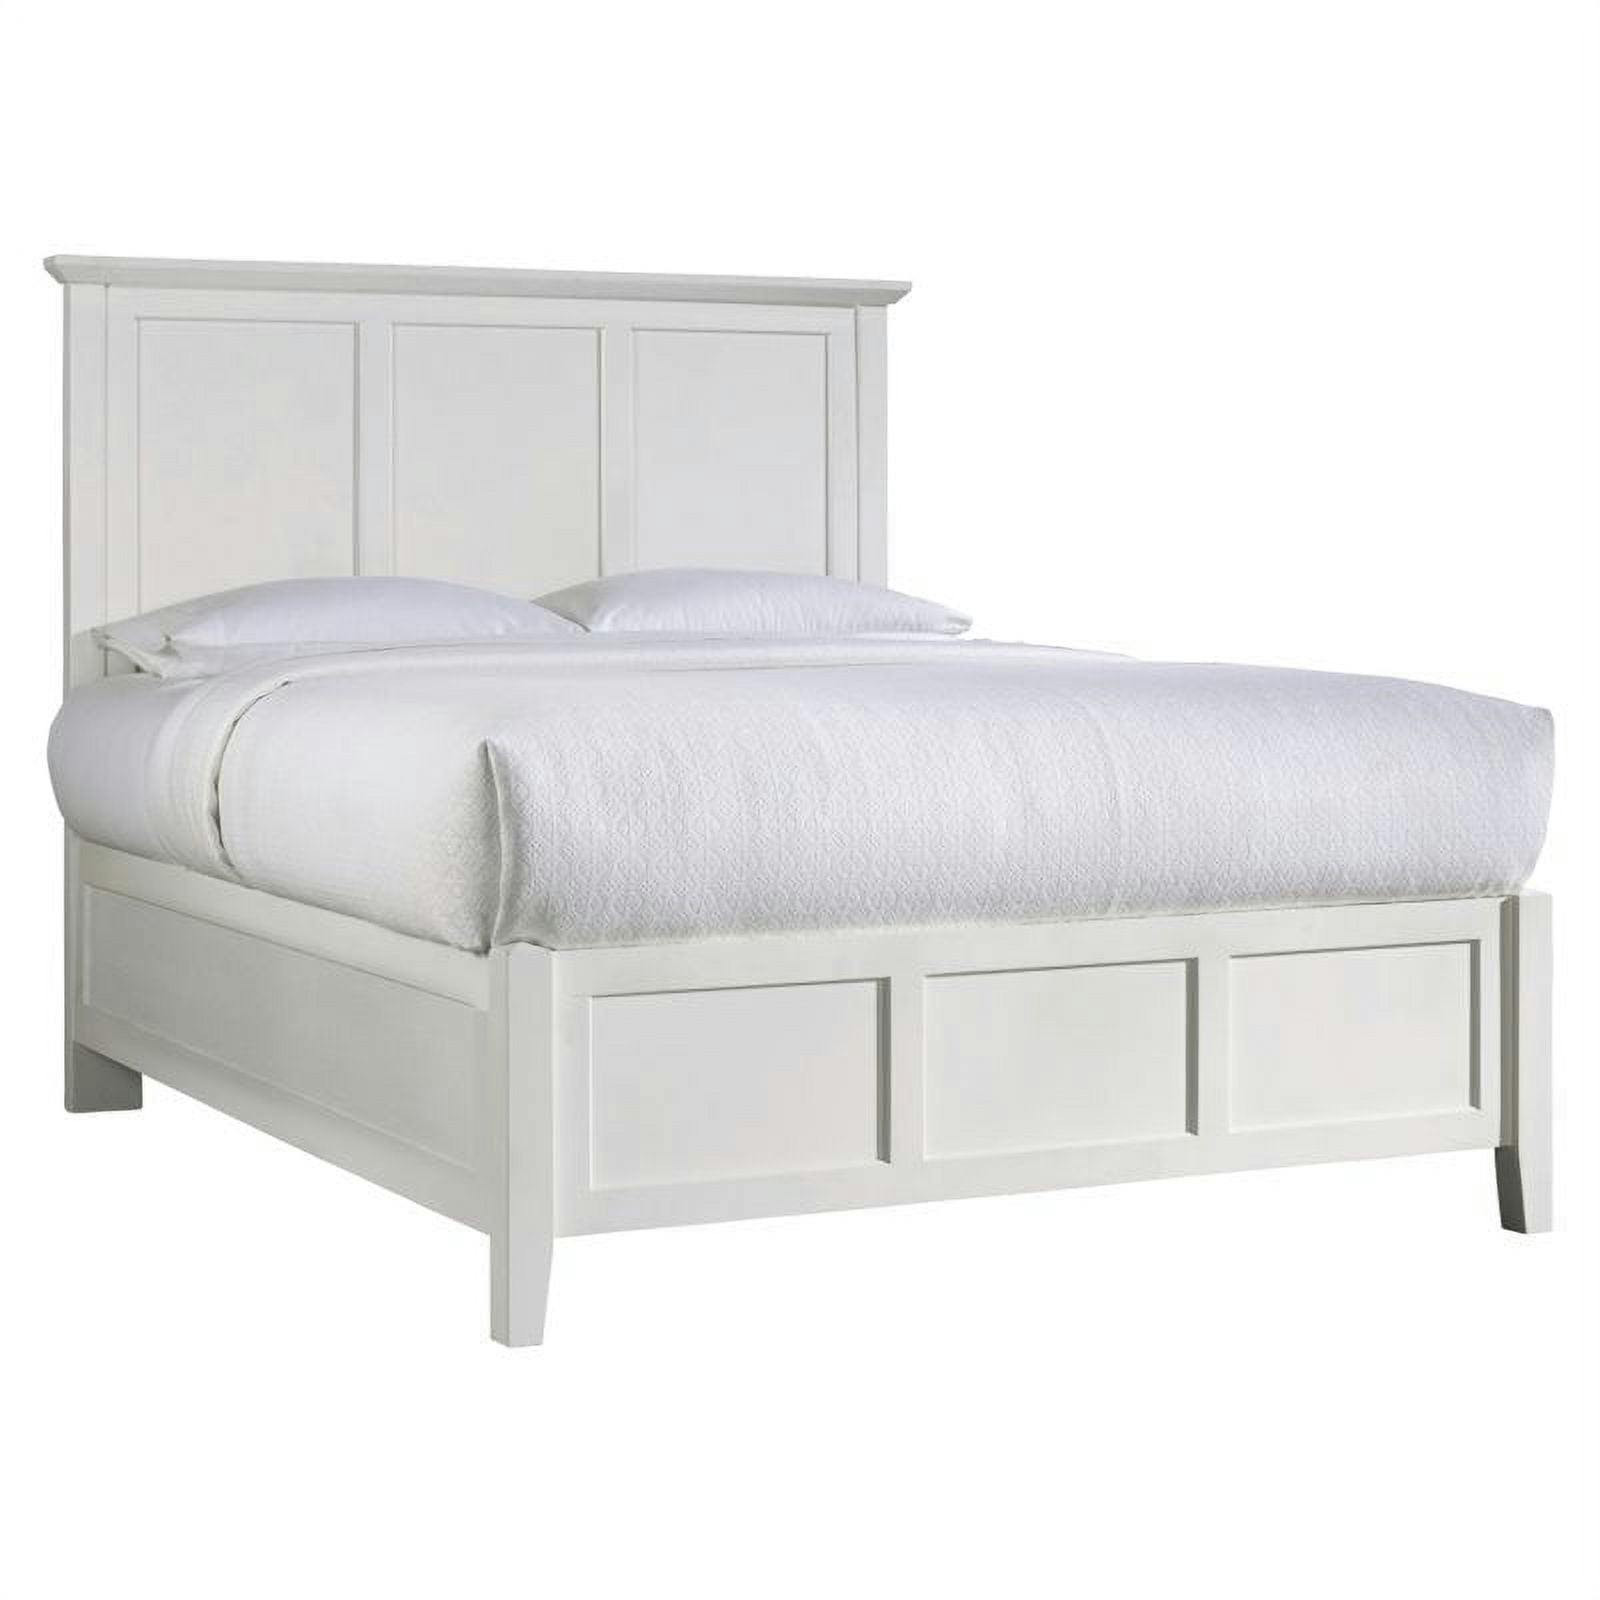 Shaker-Style Solid Mahogany California King Bed with Storage Drawers in White